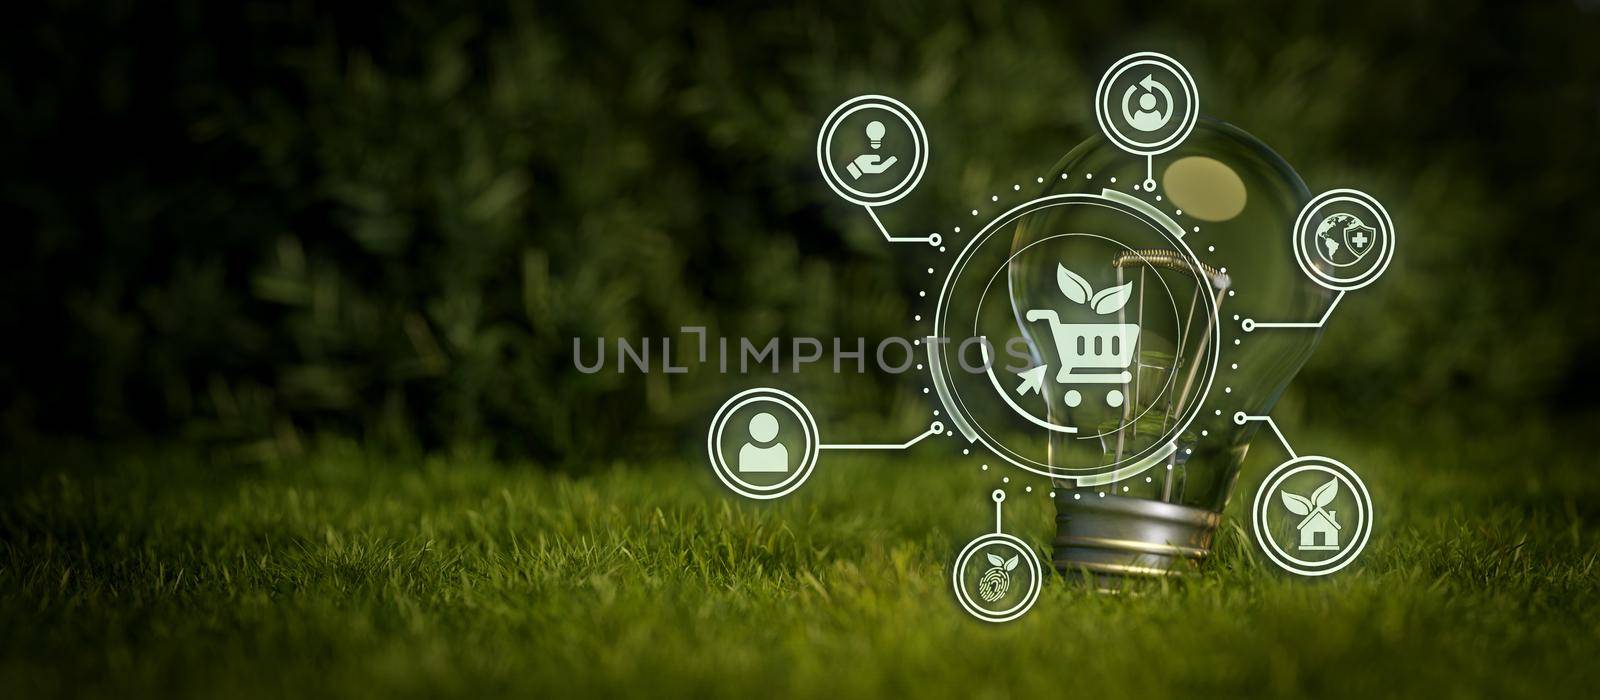 Sustainable environmental energy green business ESG icon for the environment, society, and governance in sustainable 3D Illustration by yay_lmrb